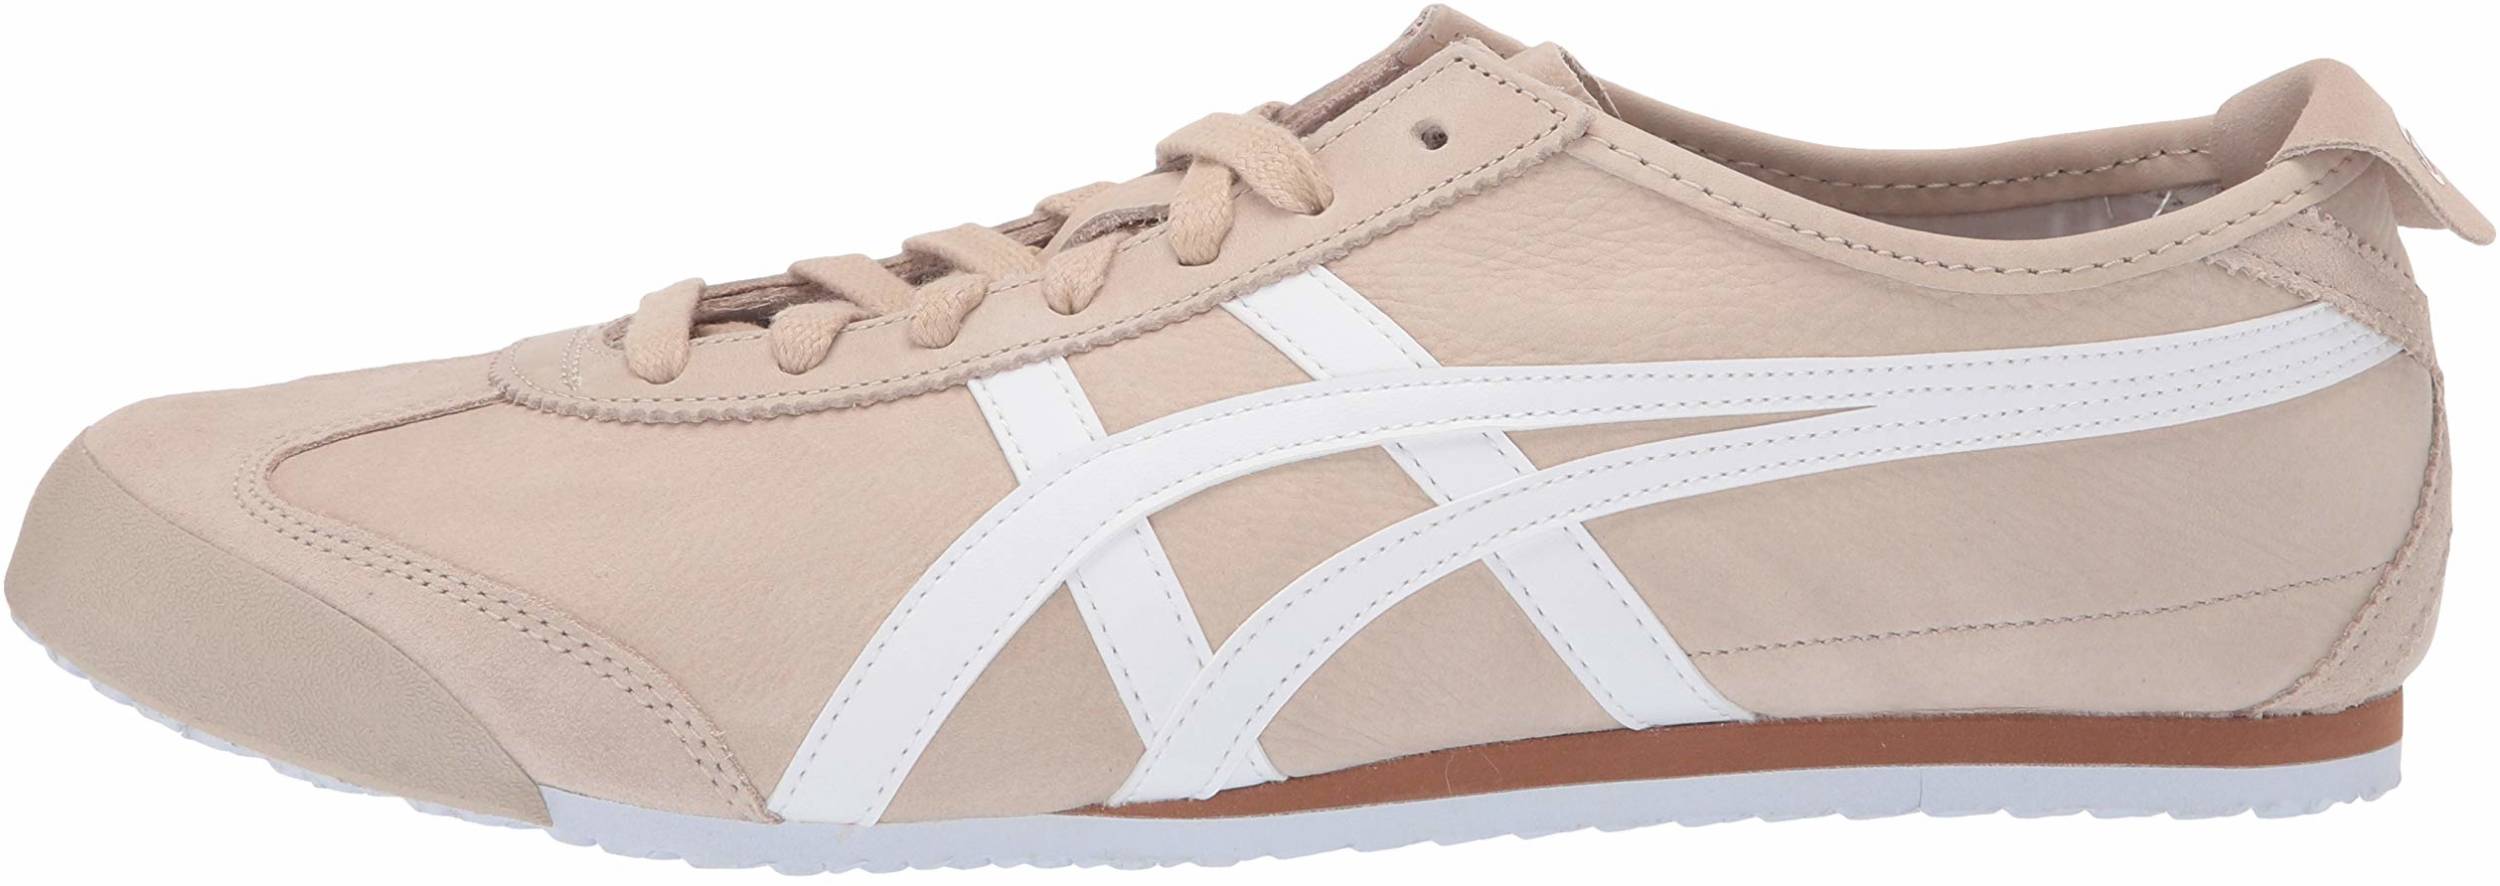 most expensive onitsuka tiger